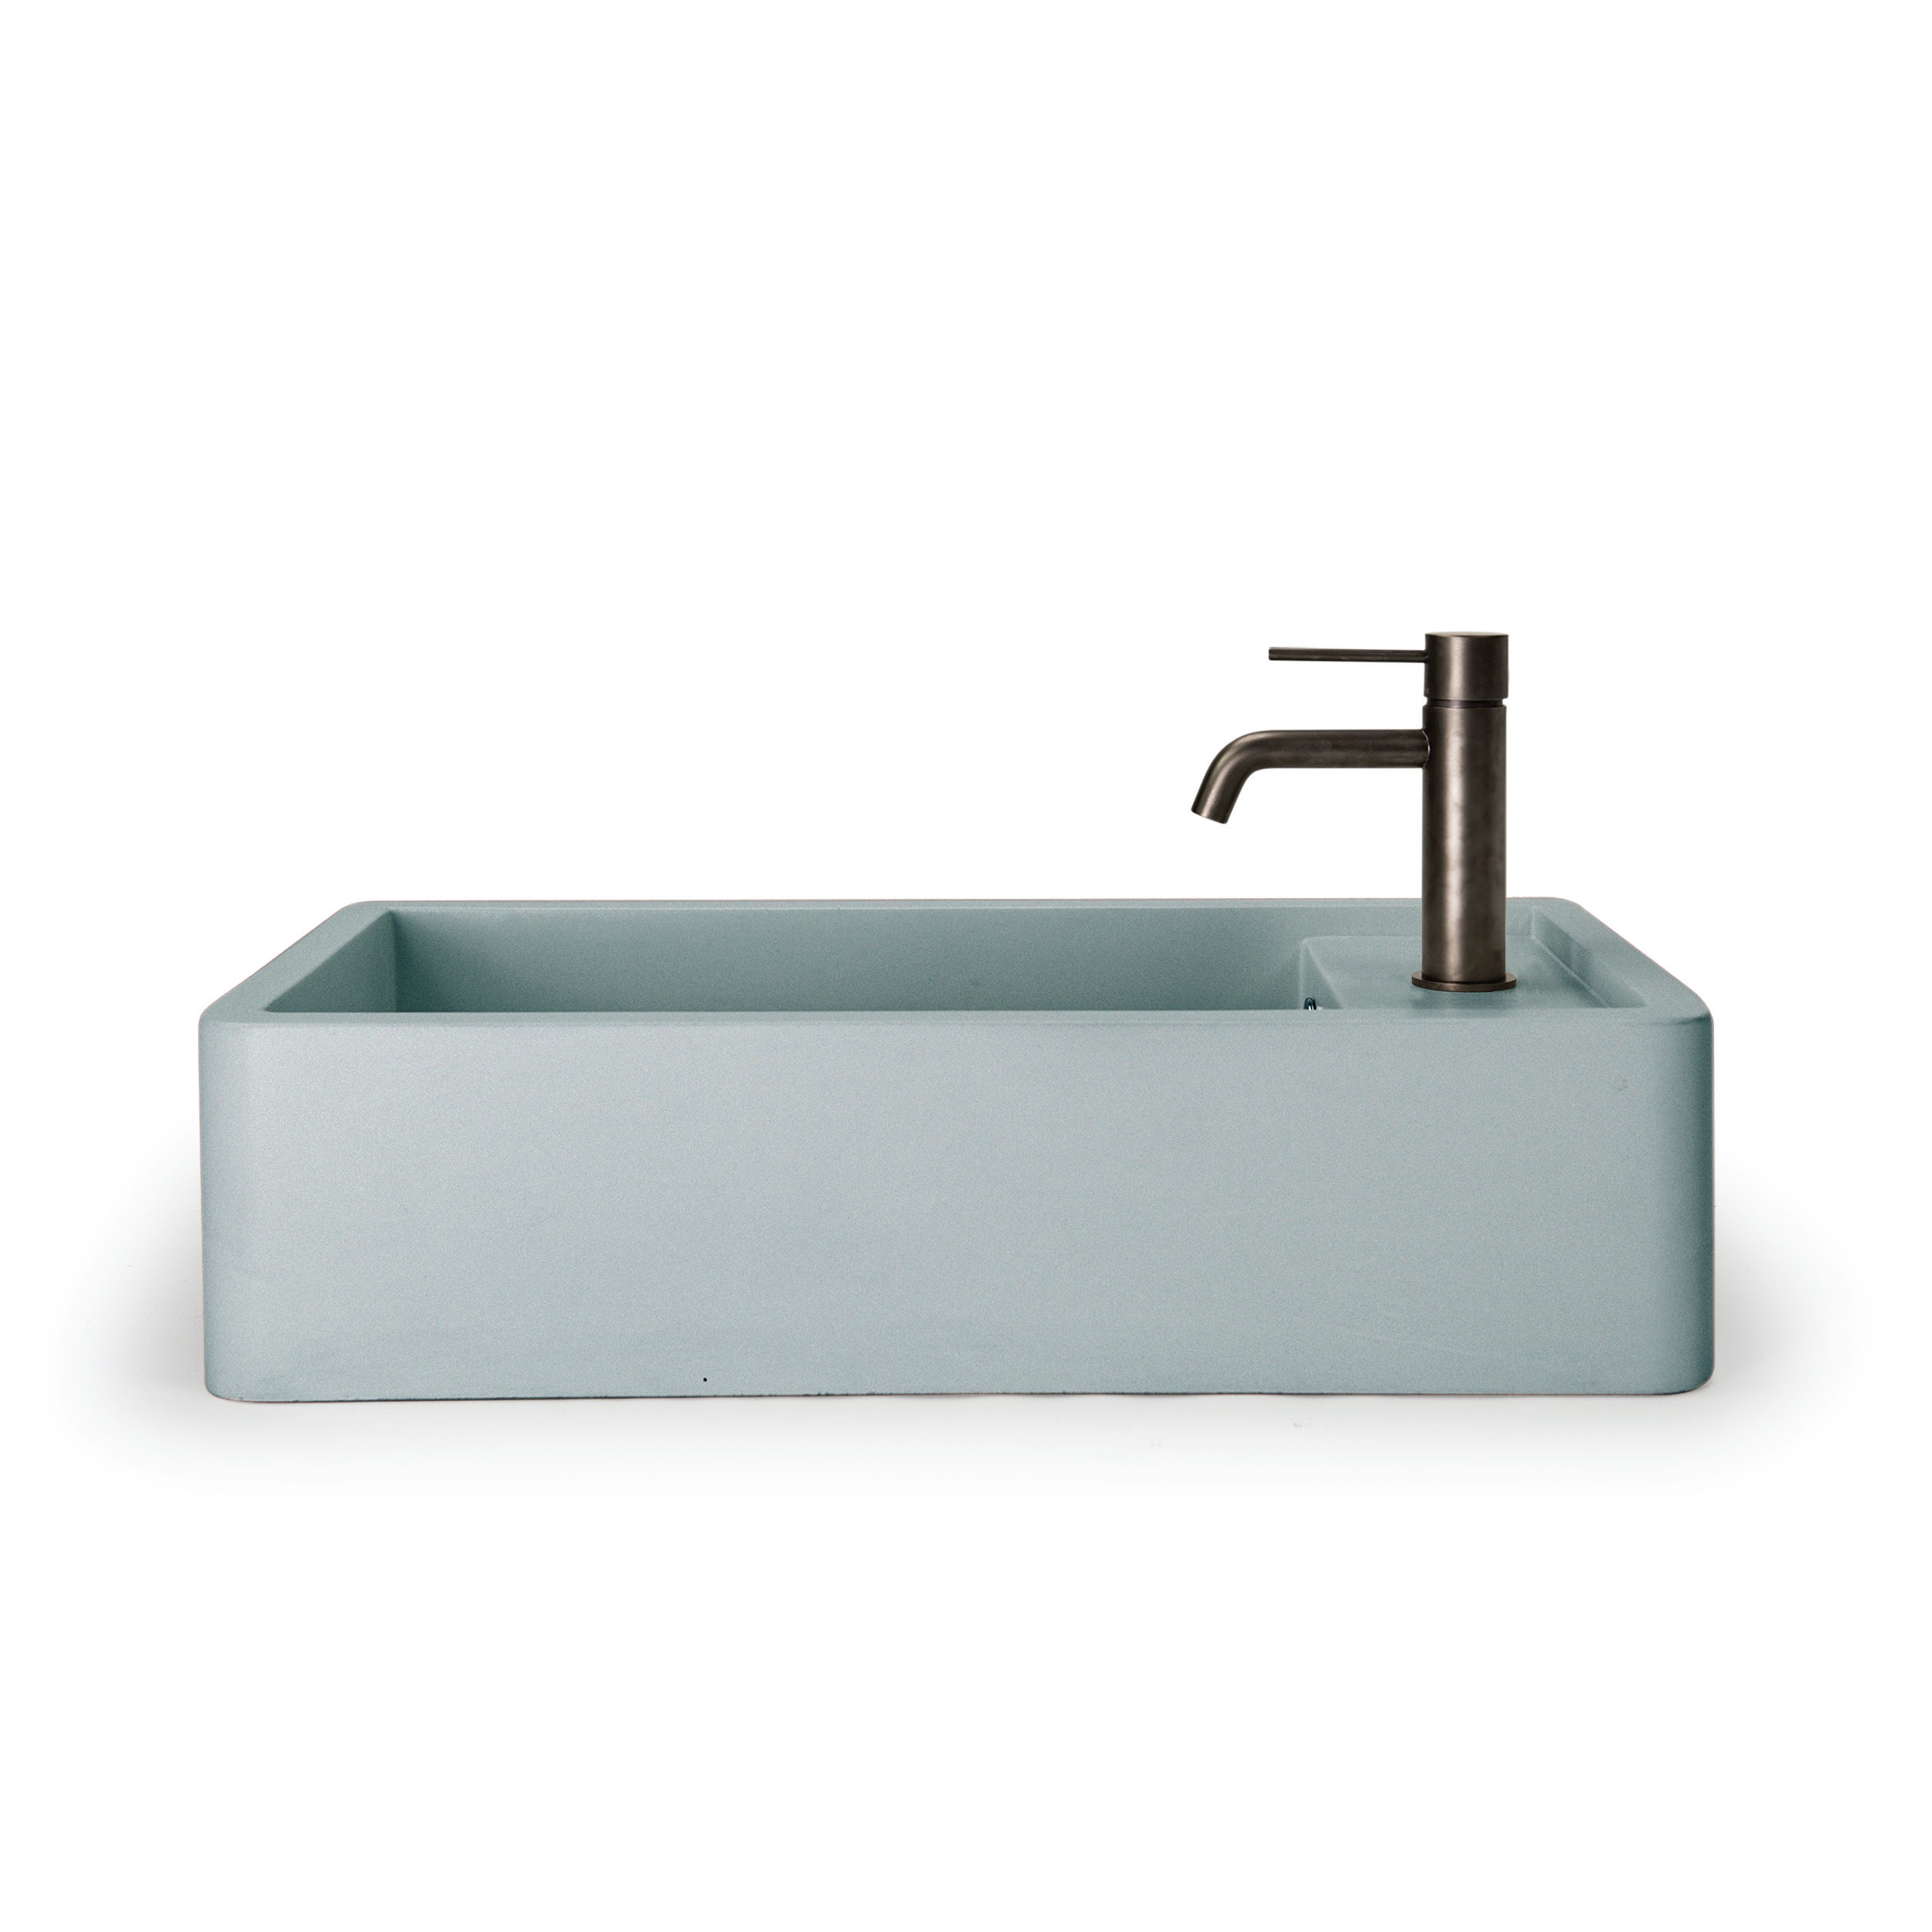 OVERFLOW BASINS COLLECTION BY NOOD CO